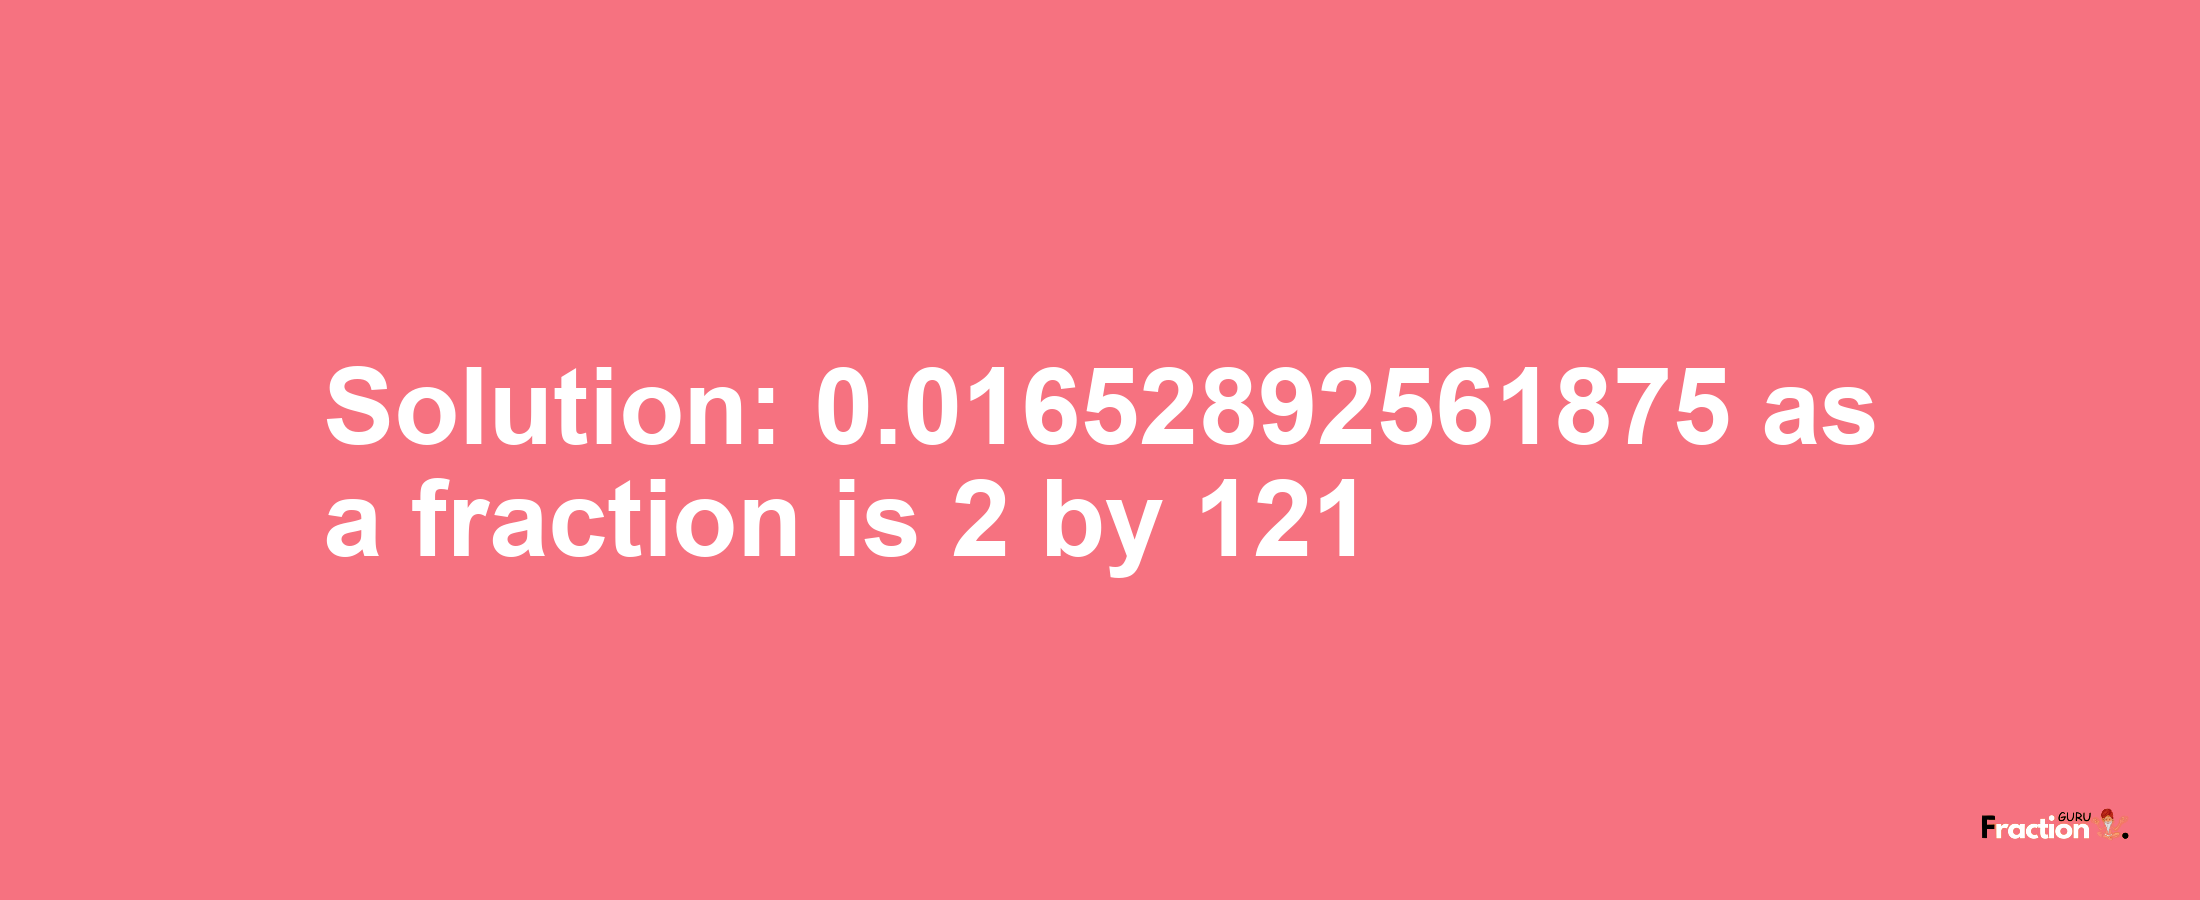 Solution:0.01652892561875 as a fraction is 2/121